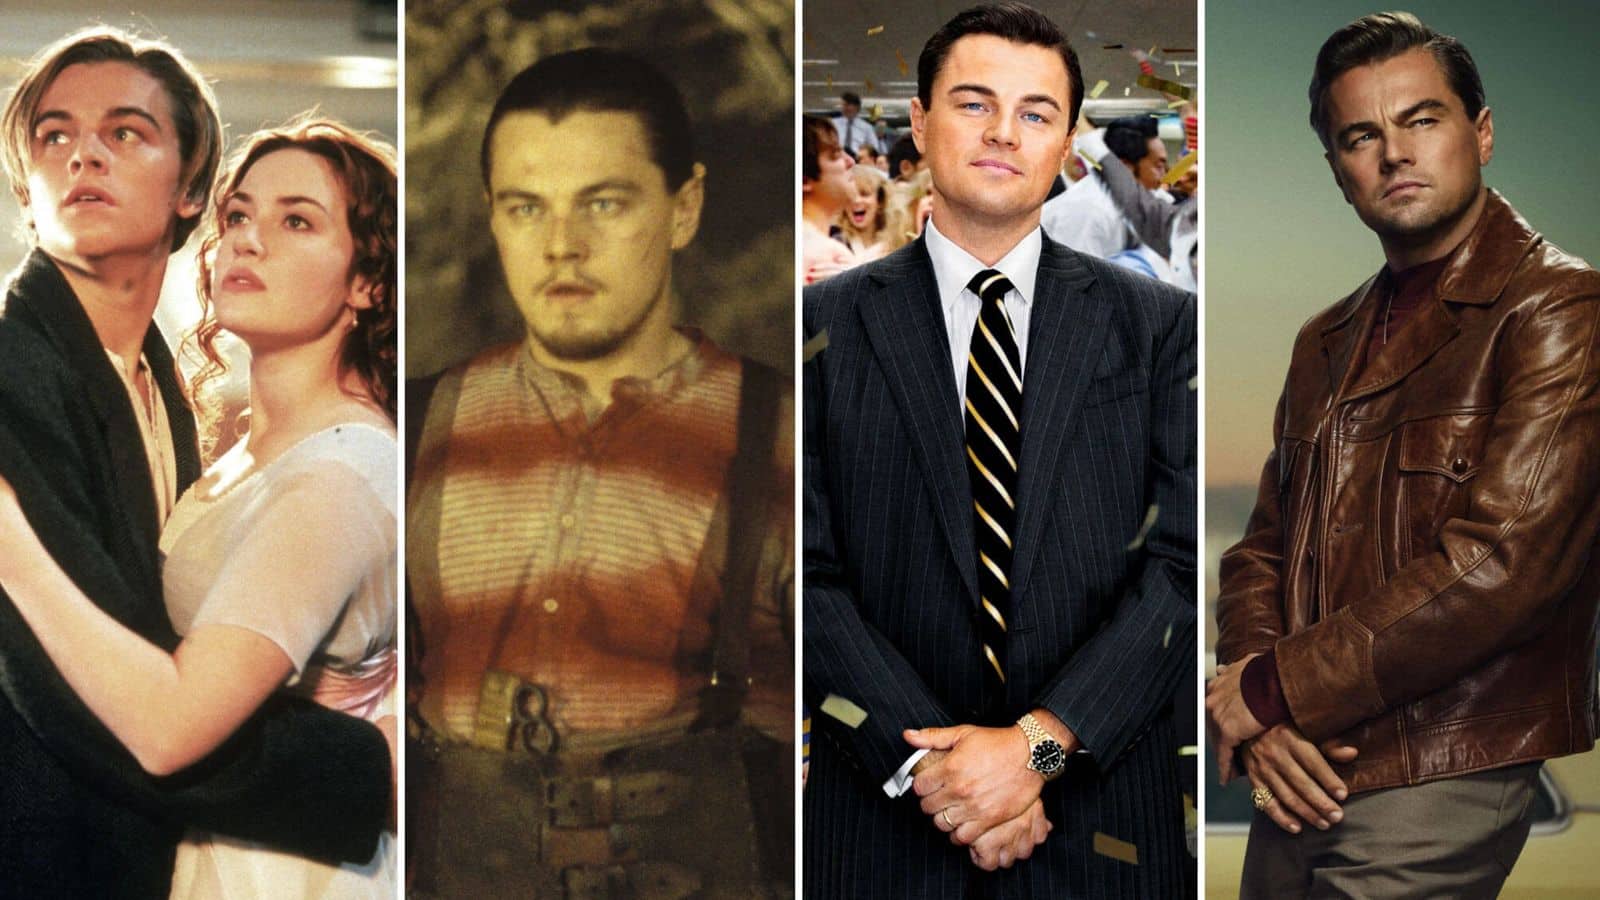 These are hands down Leonardo DiCaprio's finest performances